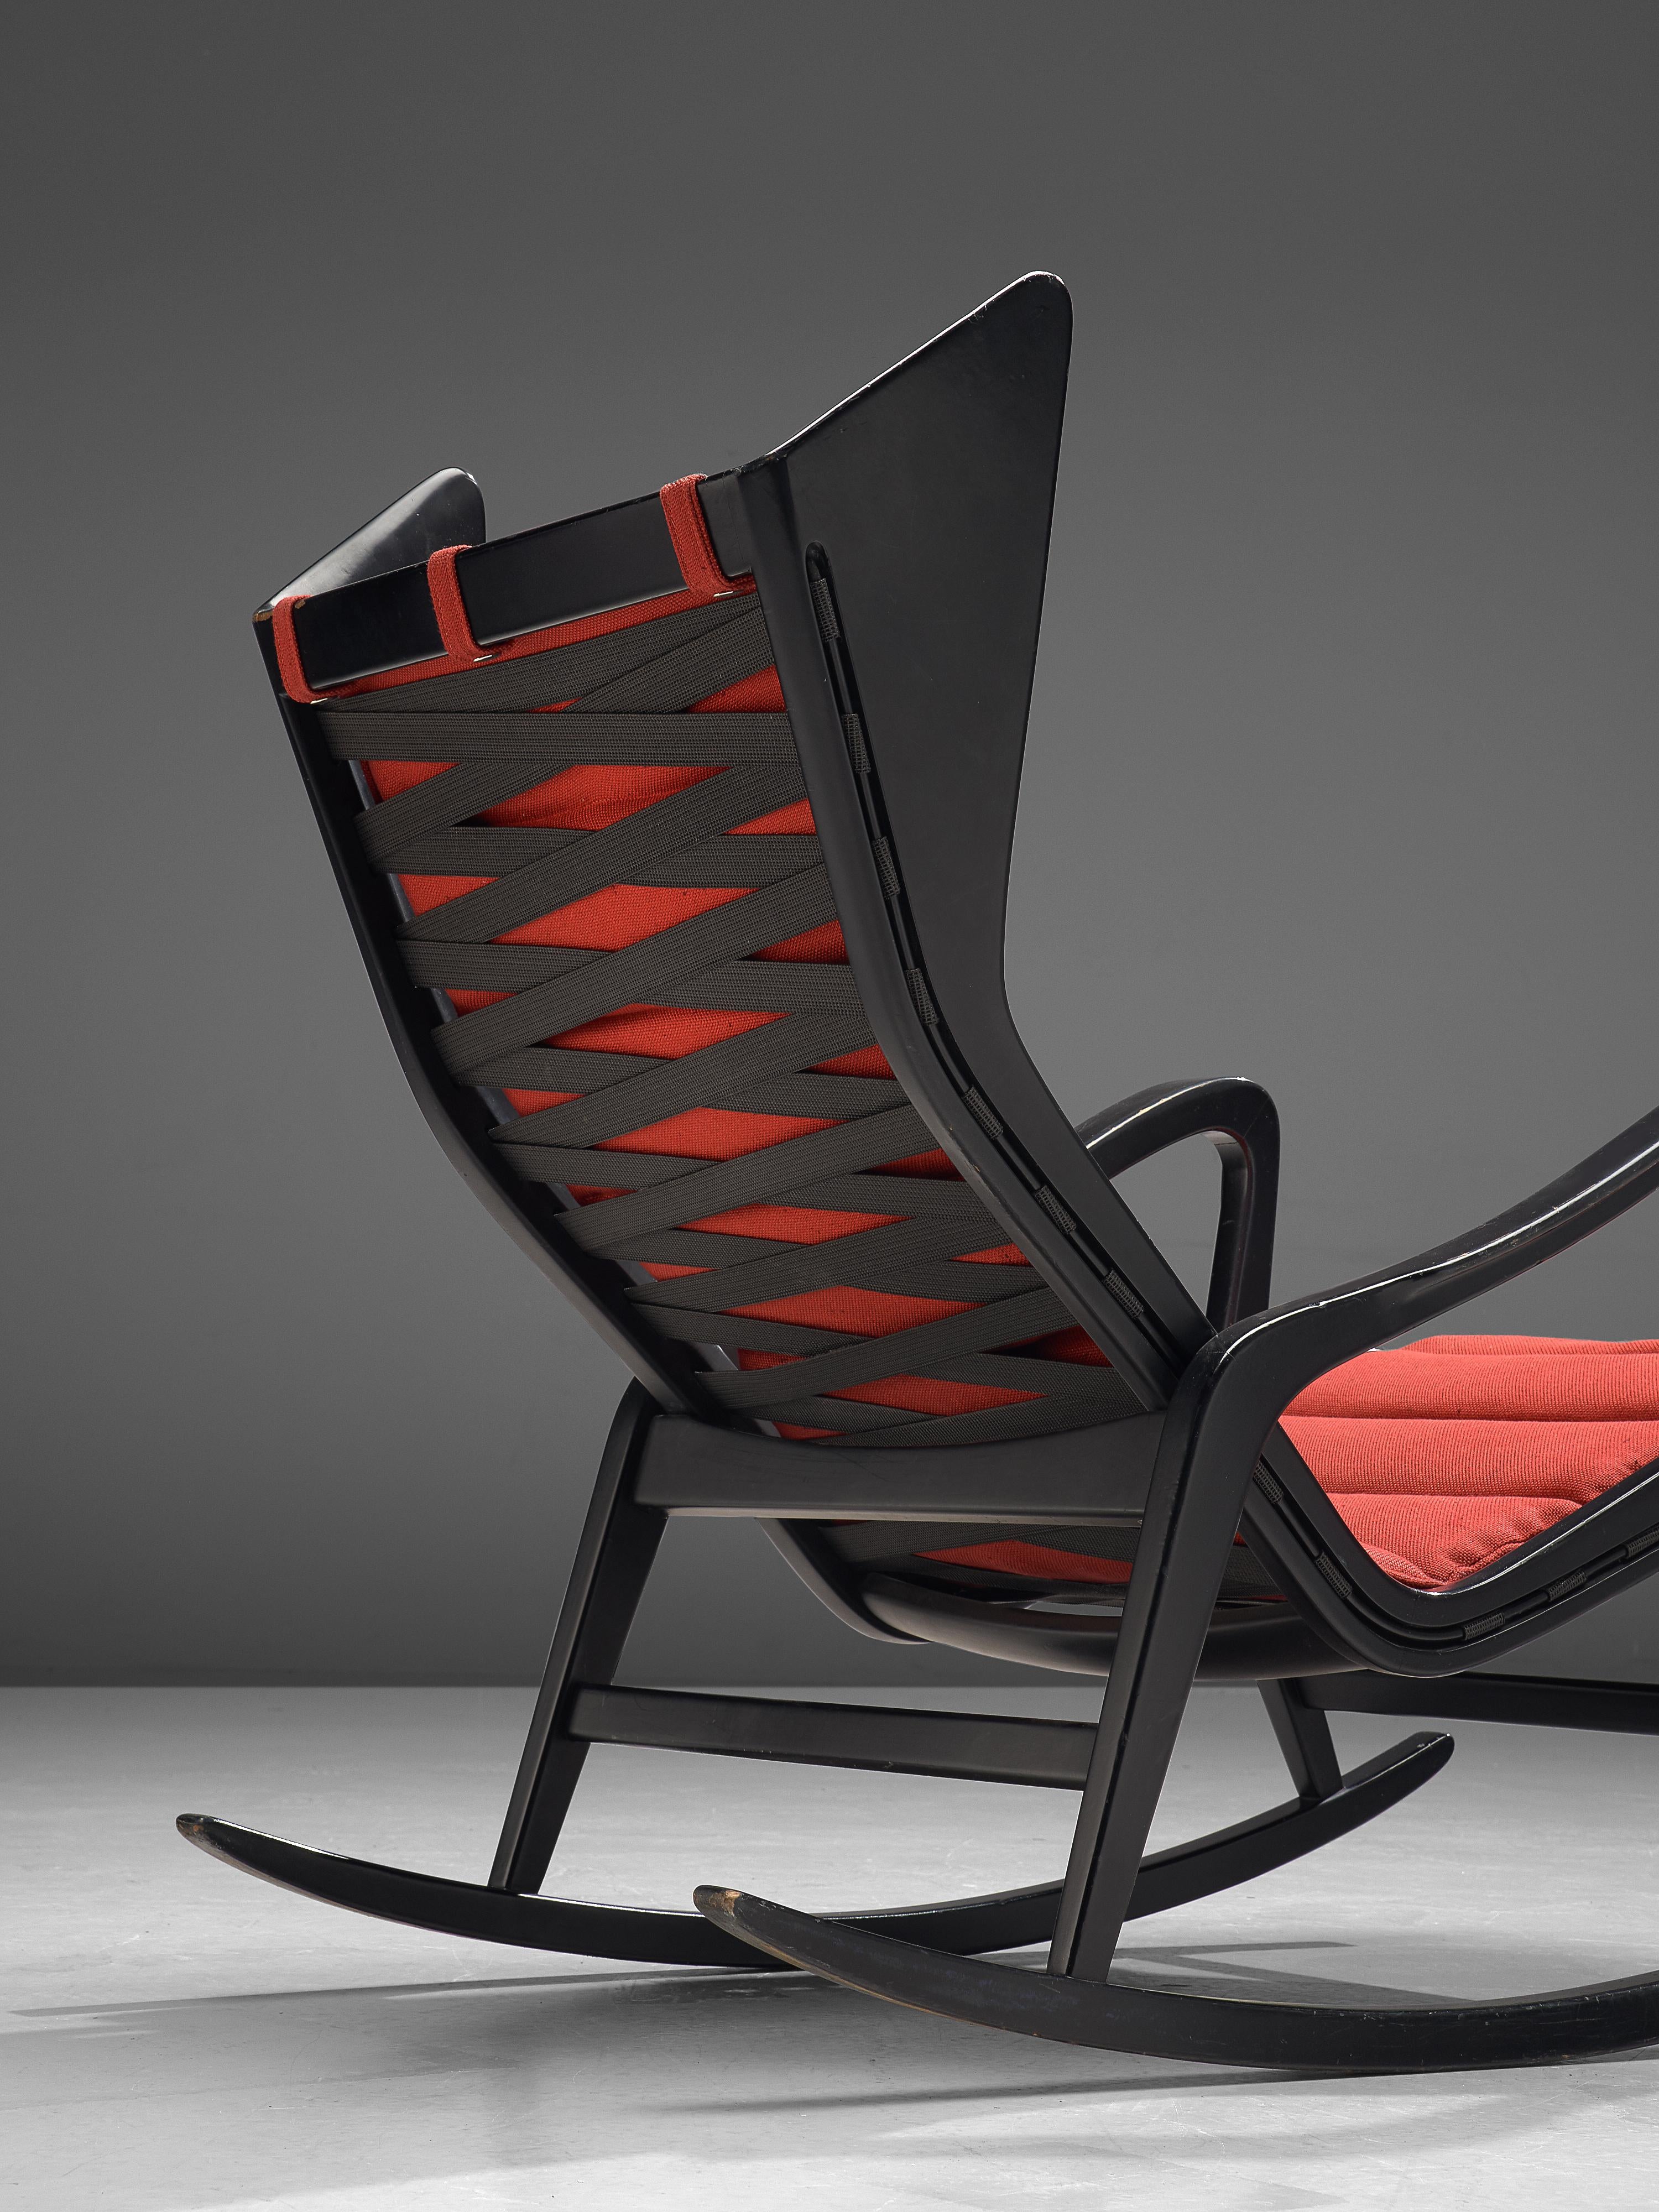 Studio Cassina '572 Rocking' Chair in Ebonized Wood and Red Upholstery